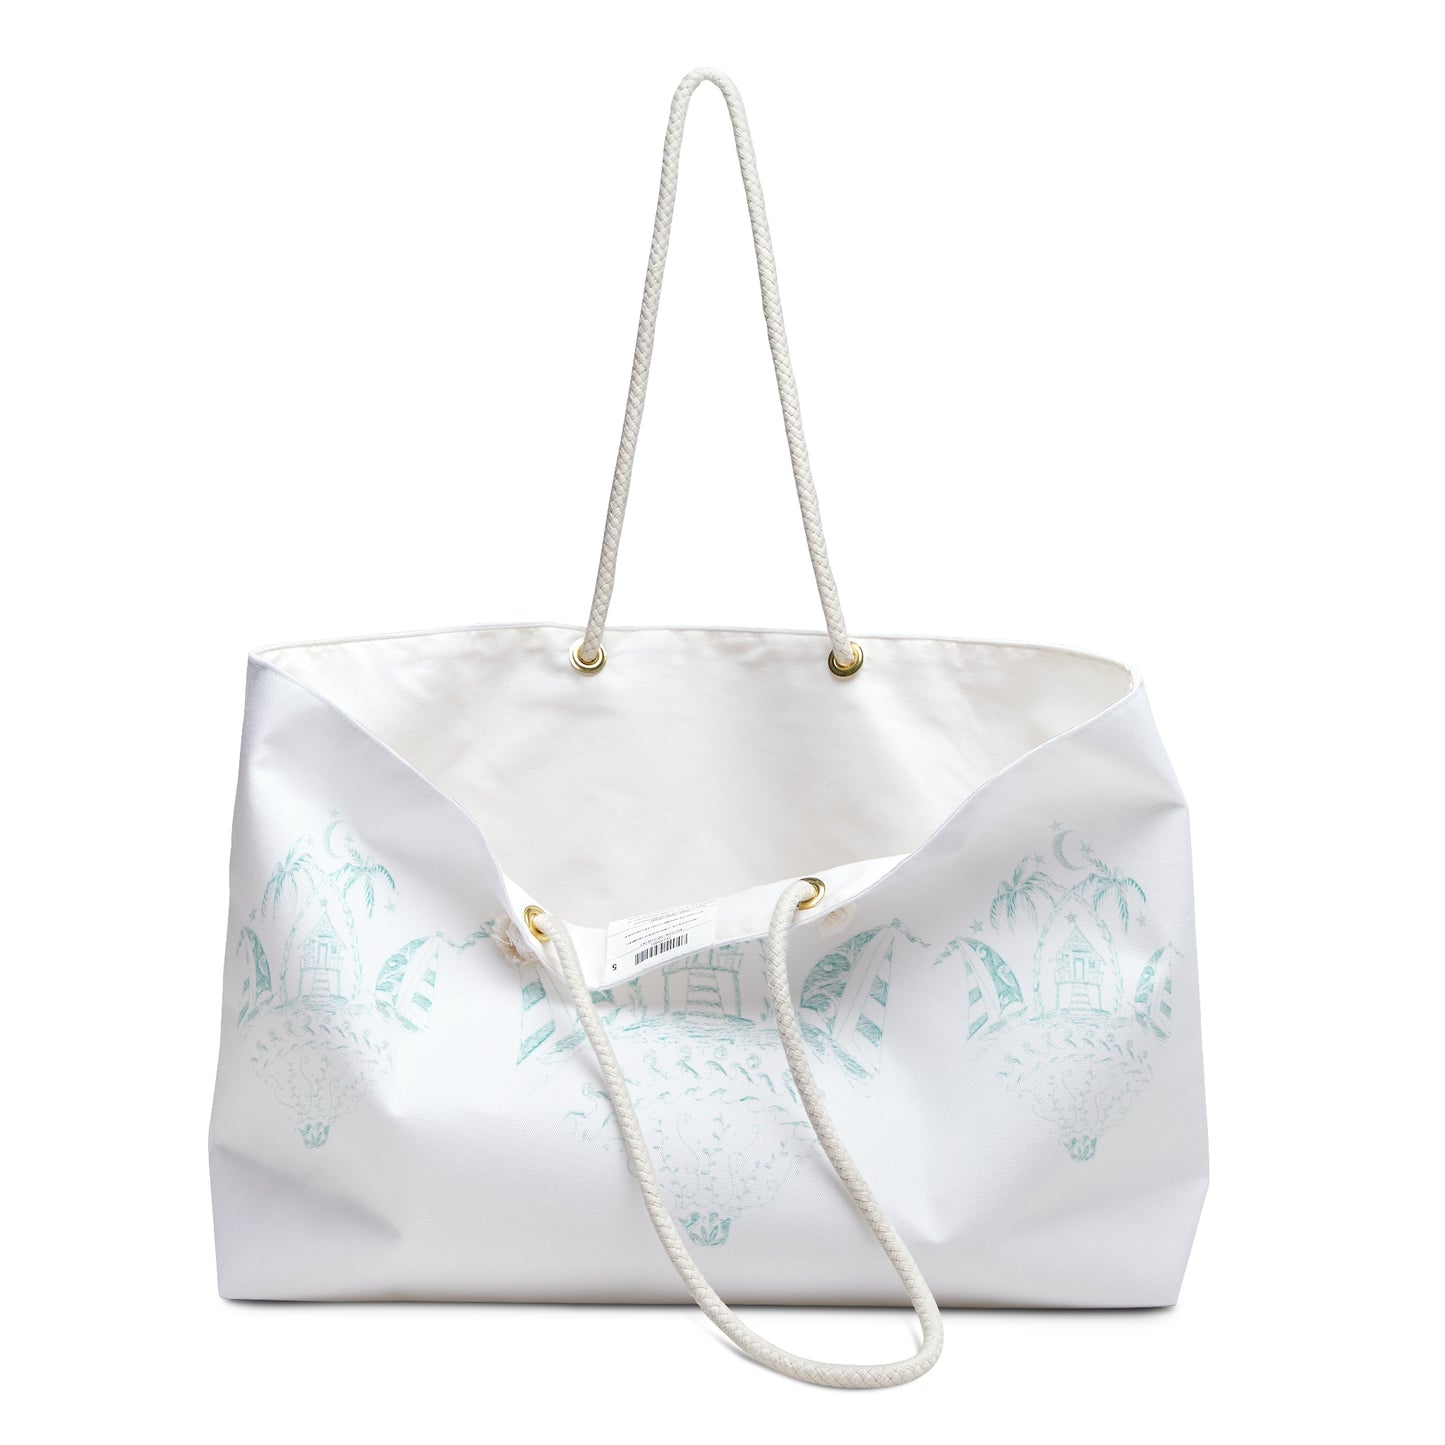 Beach Bungalow on White Weekender Bag from Talula Land